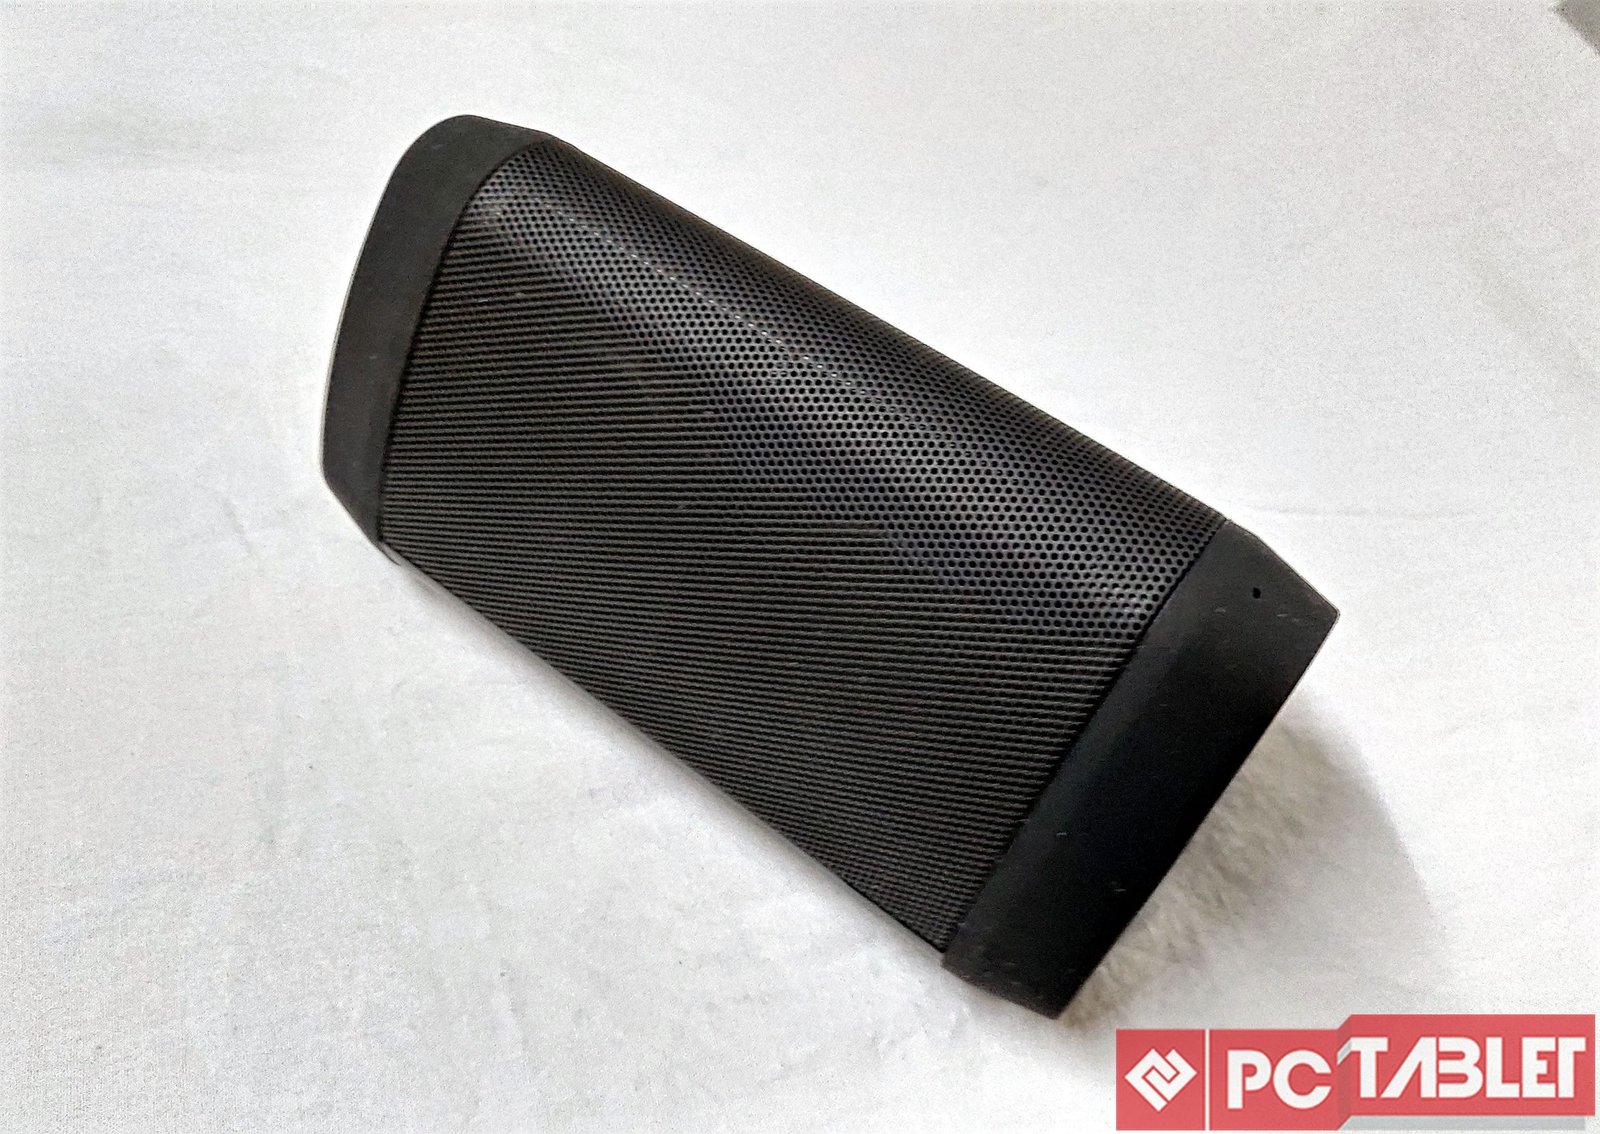 Tagg Sonic Angle Speaker 2